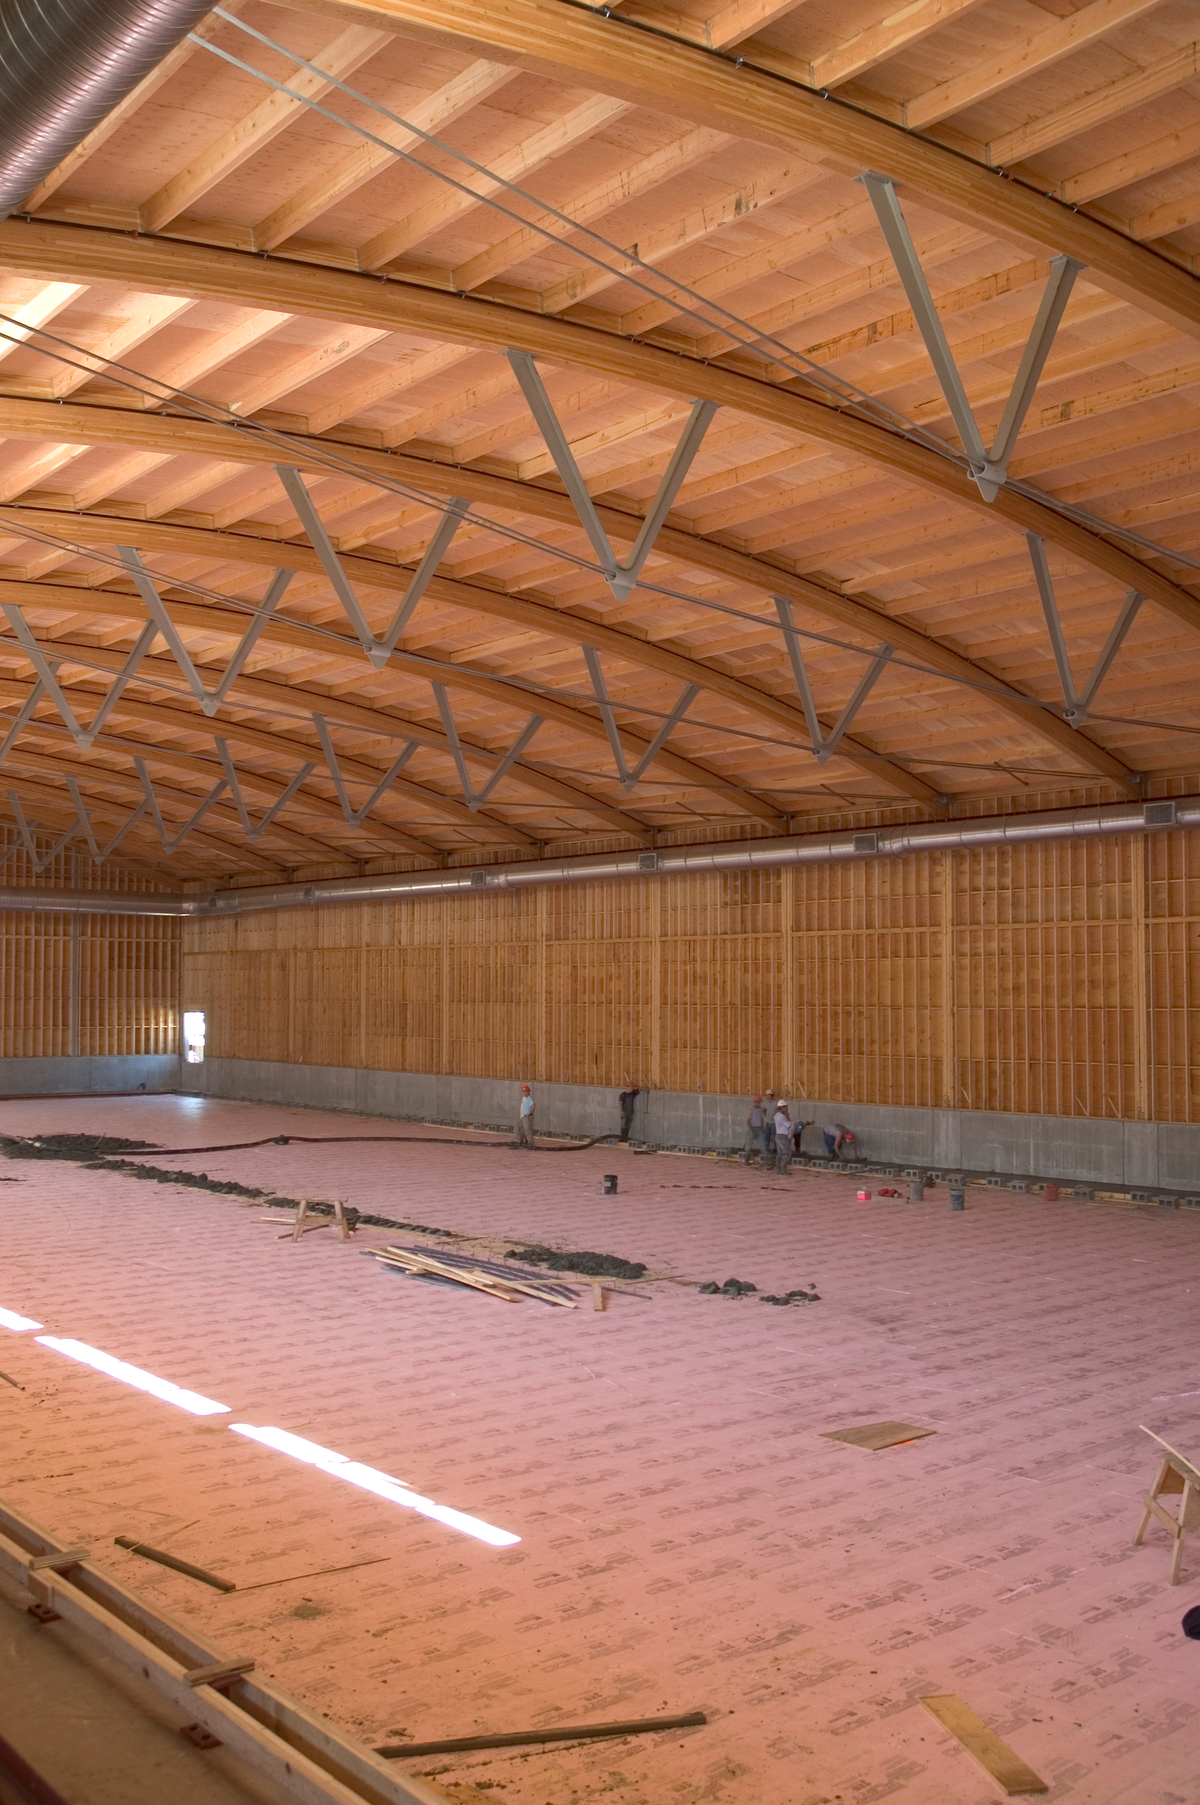 Interior daytime view of Armstrong-Spallumcheen Arena showing arched glue-laminated (Glulam) beams with wood truss and plywood roof above and prefabricated wooden panel walls below